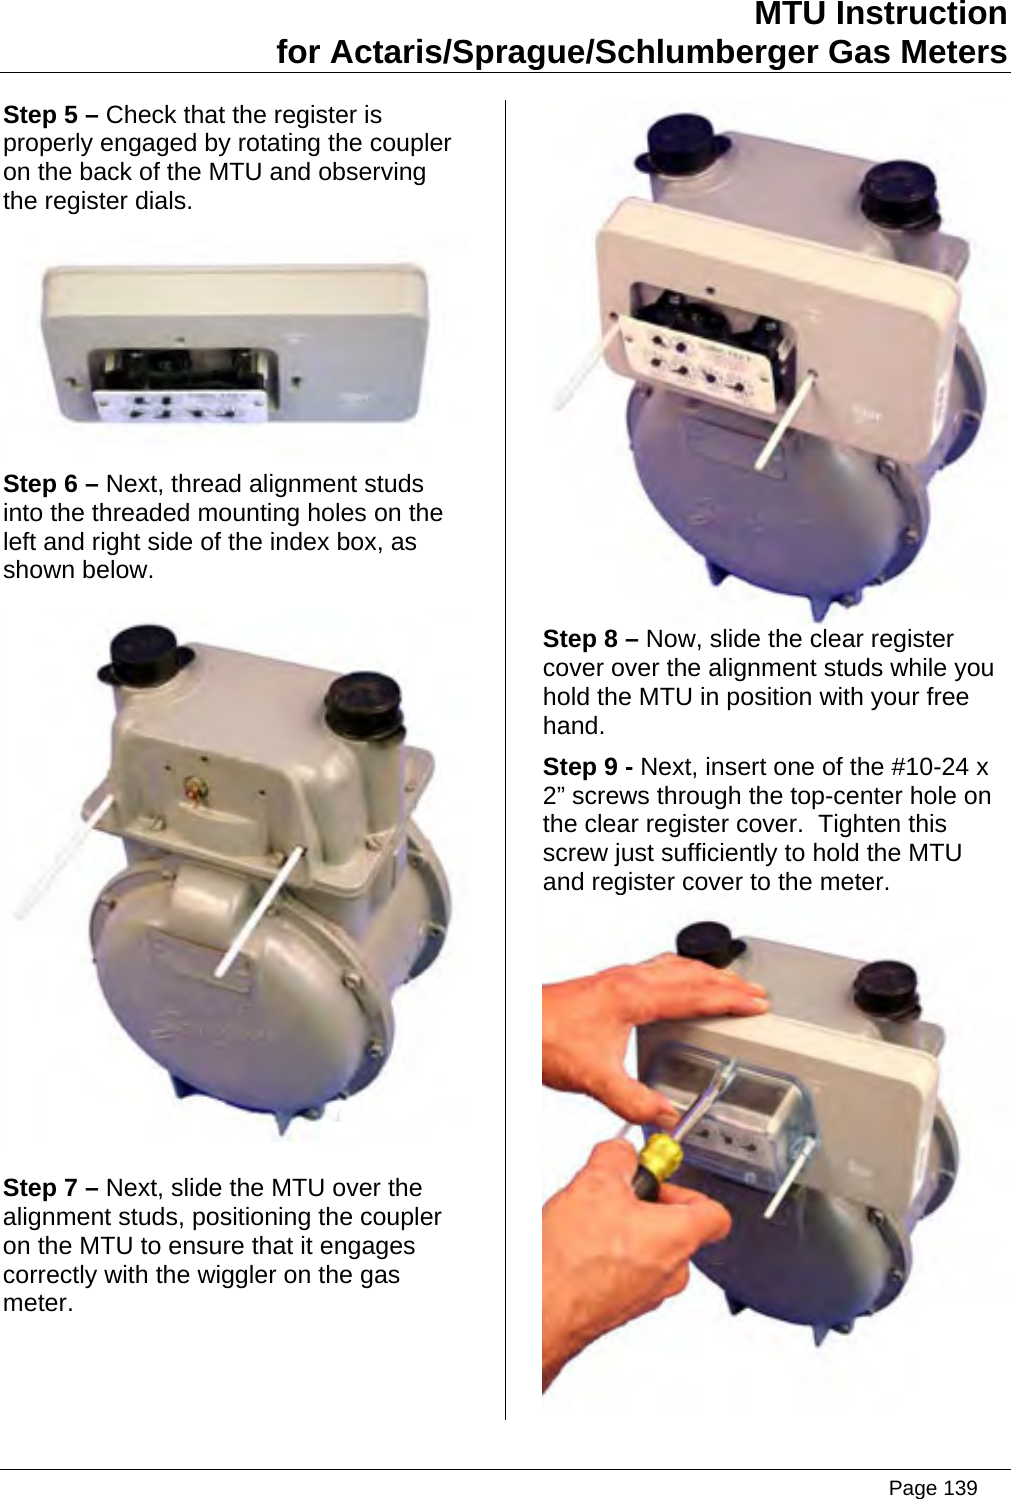 MTU Instruction for Actaris/Sprague/Schlumberger Gas Meters Step 5 – Check that the register is properly engaged by rotating the coupler on the back of the MTU and observing the register dials.  Step 6 – Next, thread alignment studs into the threaded mounting holes on the left and right side of the index box, as shown below.  Step 7 – Next, slide the MTU over the alignment studs, positioning the coupler on the MTU to ensure that it engages correctly with the wiggler on the gas meter.  Step 8 – Now, slide the clear register cover over the alignment studs while you hold the MTU in position with your free hand. Step 9 - Next, insert one of the #10-24 x 2” screws through the top-center hole on the clear register cover.  Tighten this screw just sufficiently to hold the MTU and register cover to the meter.    Page 139